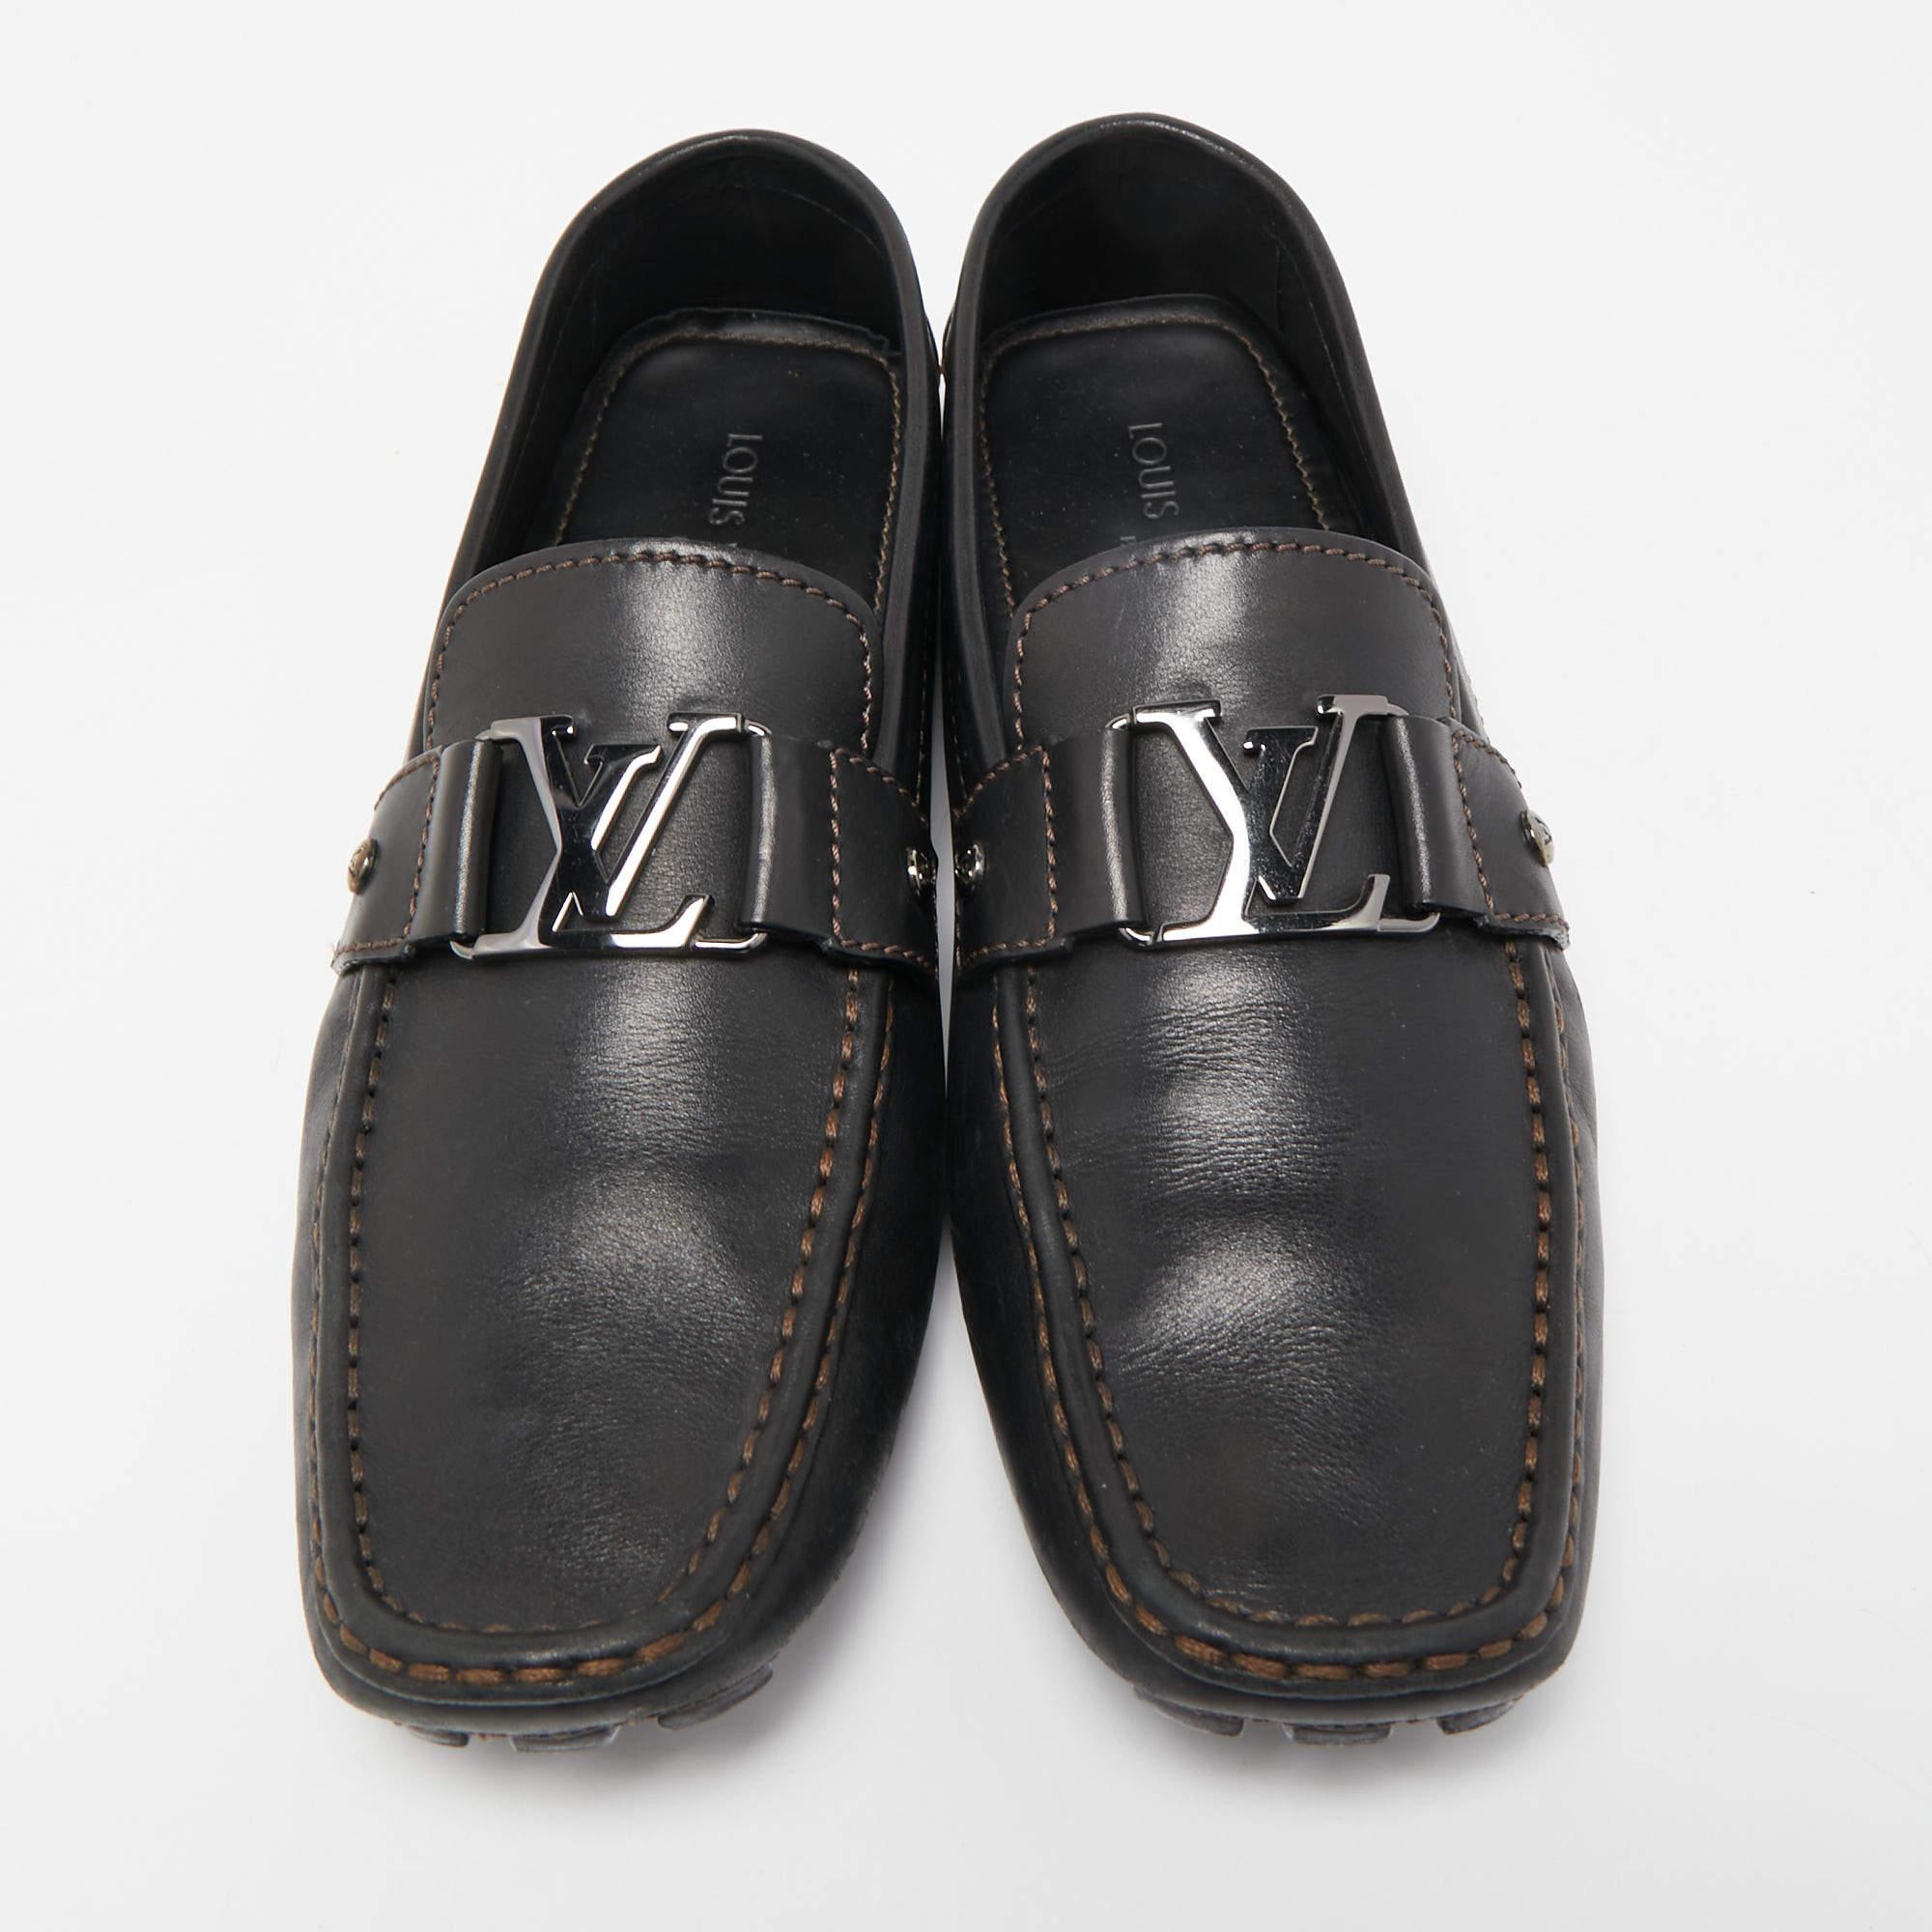 Practical, fashionable, and durable—these designer loafers are carefully built to be fine companions to your everyday style. They come made using the best materials to be a prized buy.

Includes: Original Box, Info Booklet

